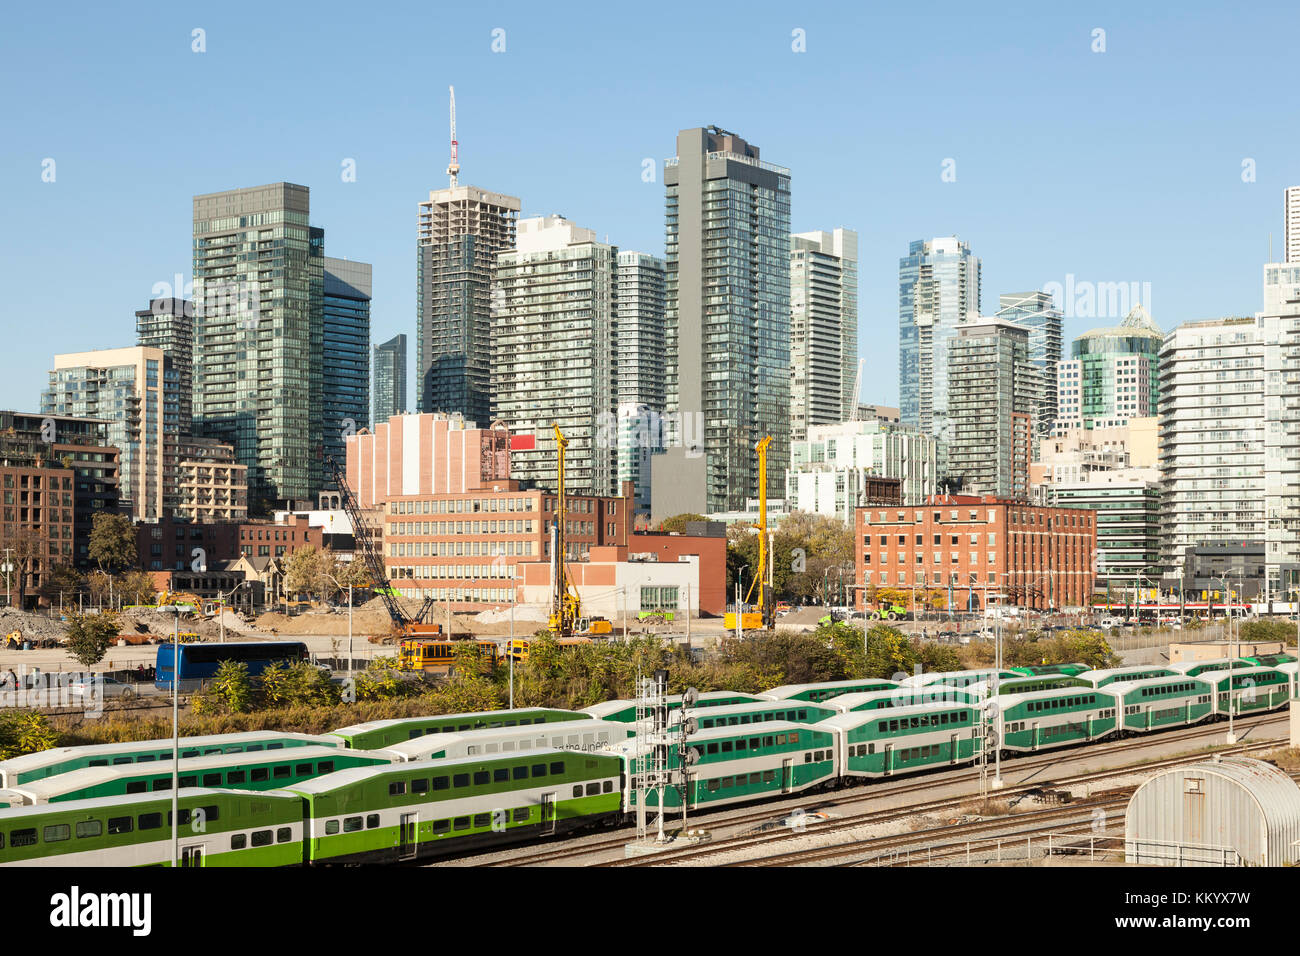 Skyline of Toronto downtown with a railroad in foreground. City of Toronto, Canada Stock Photo